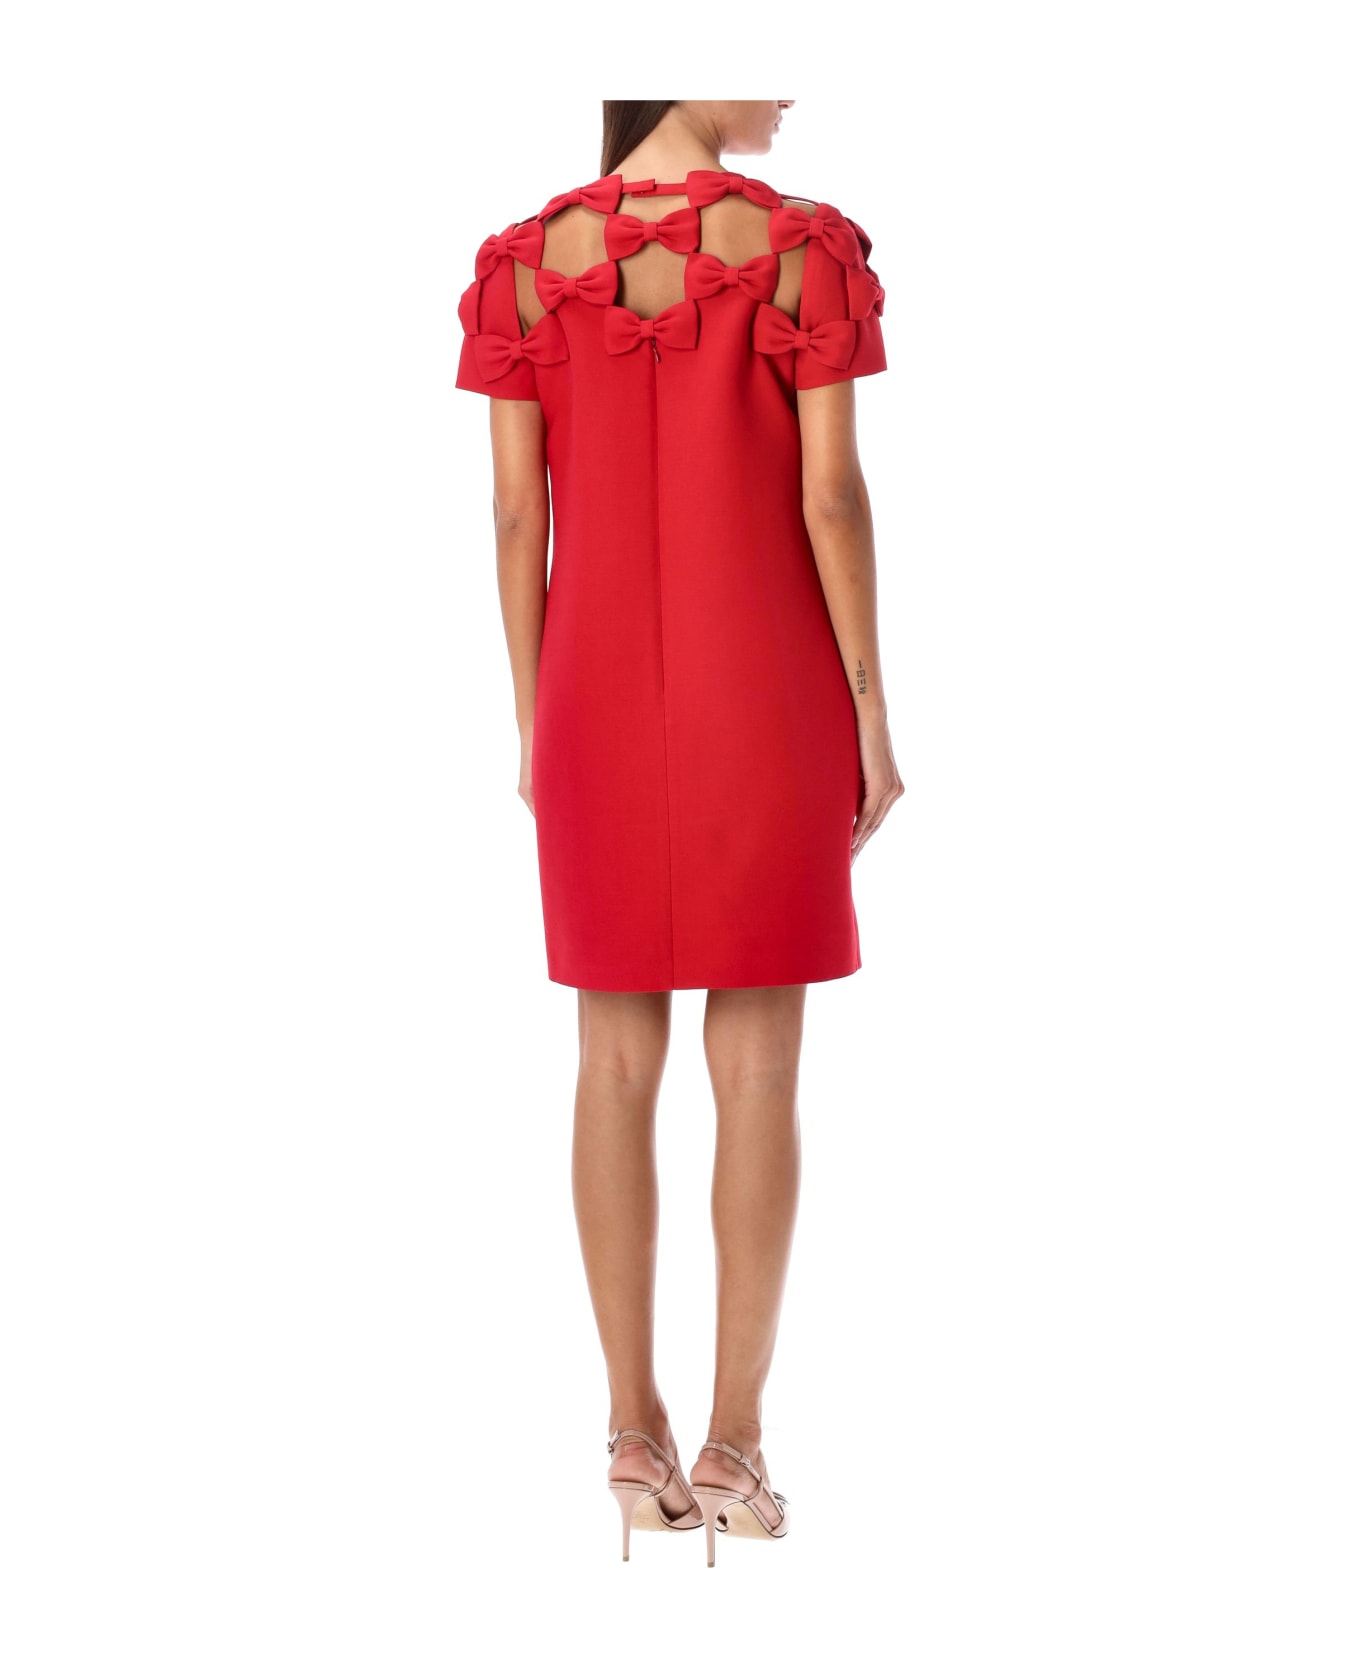 Valentino Garavani Embroidered Crepe Couture Bow Short Dress - RED